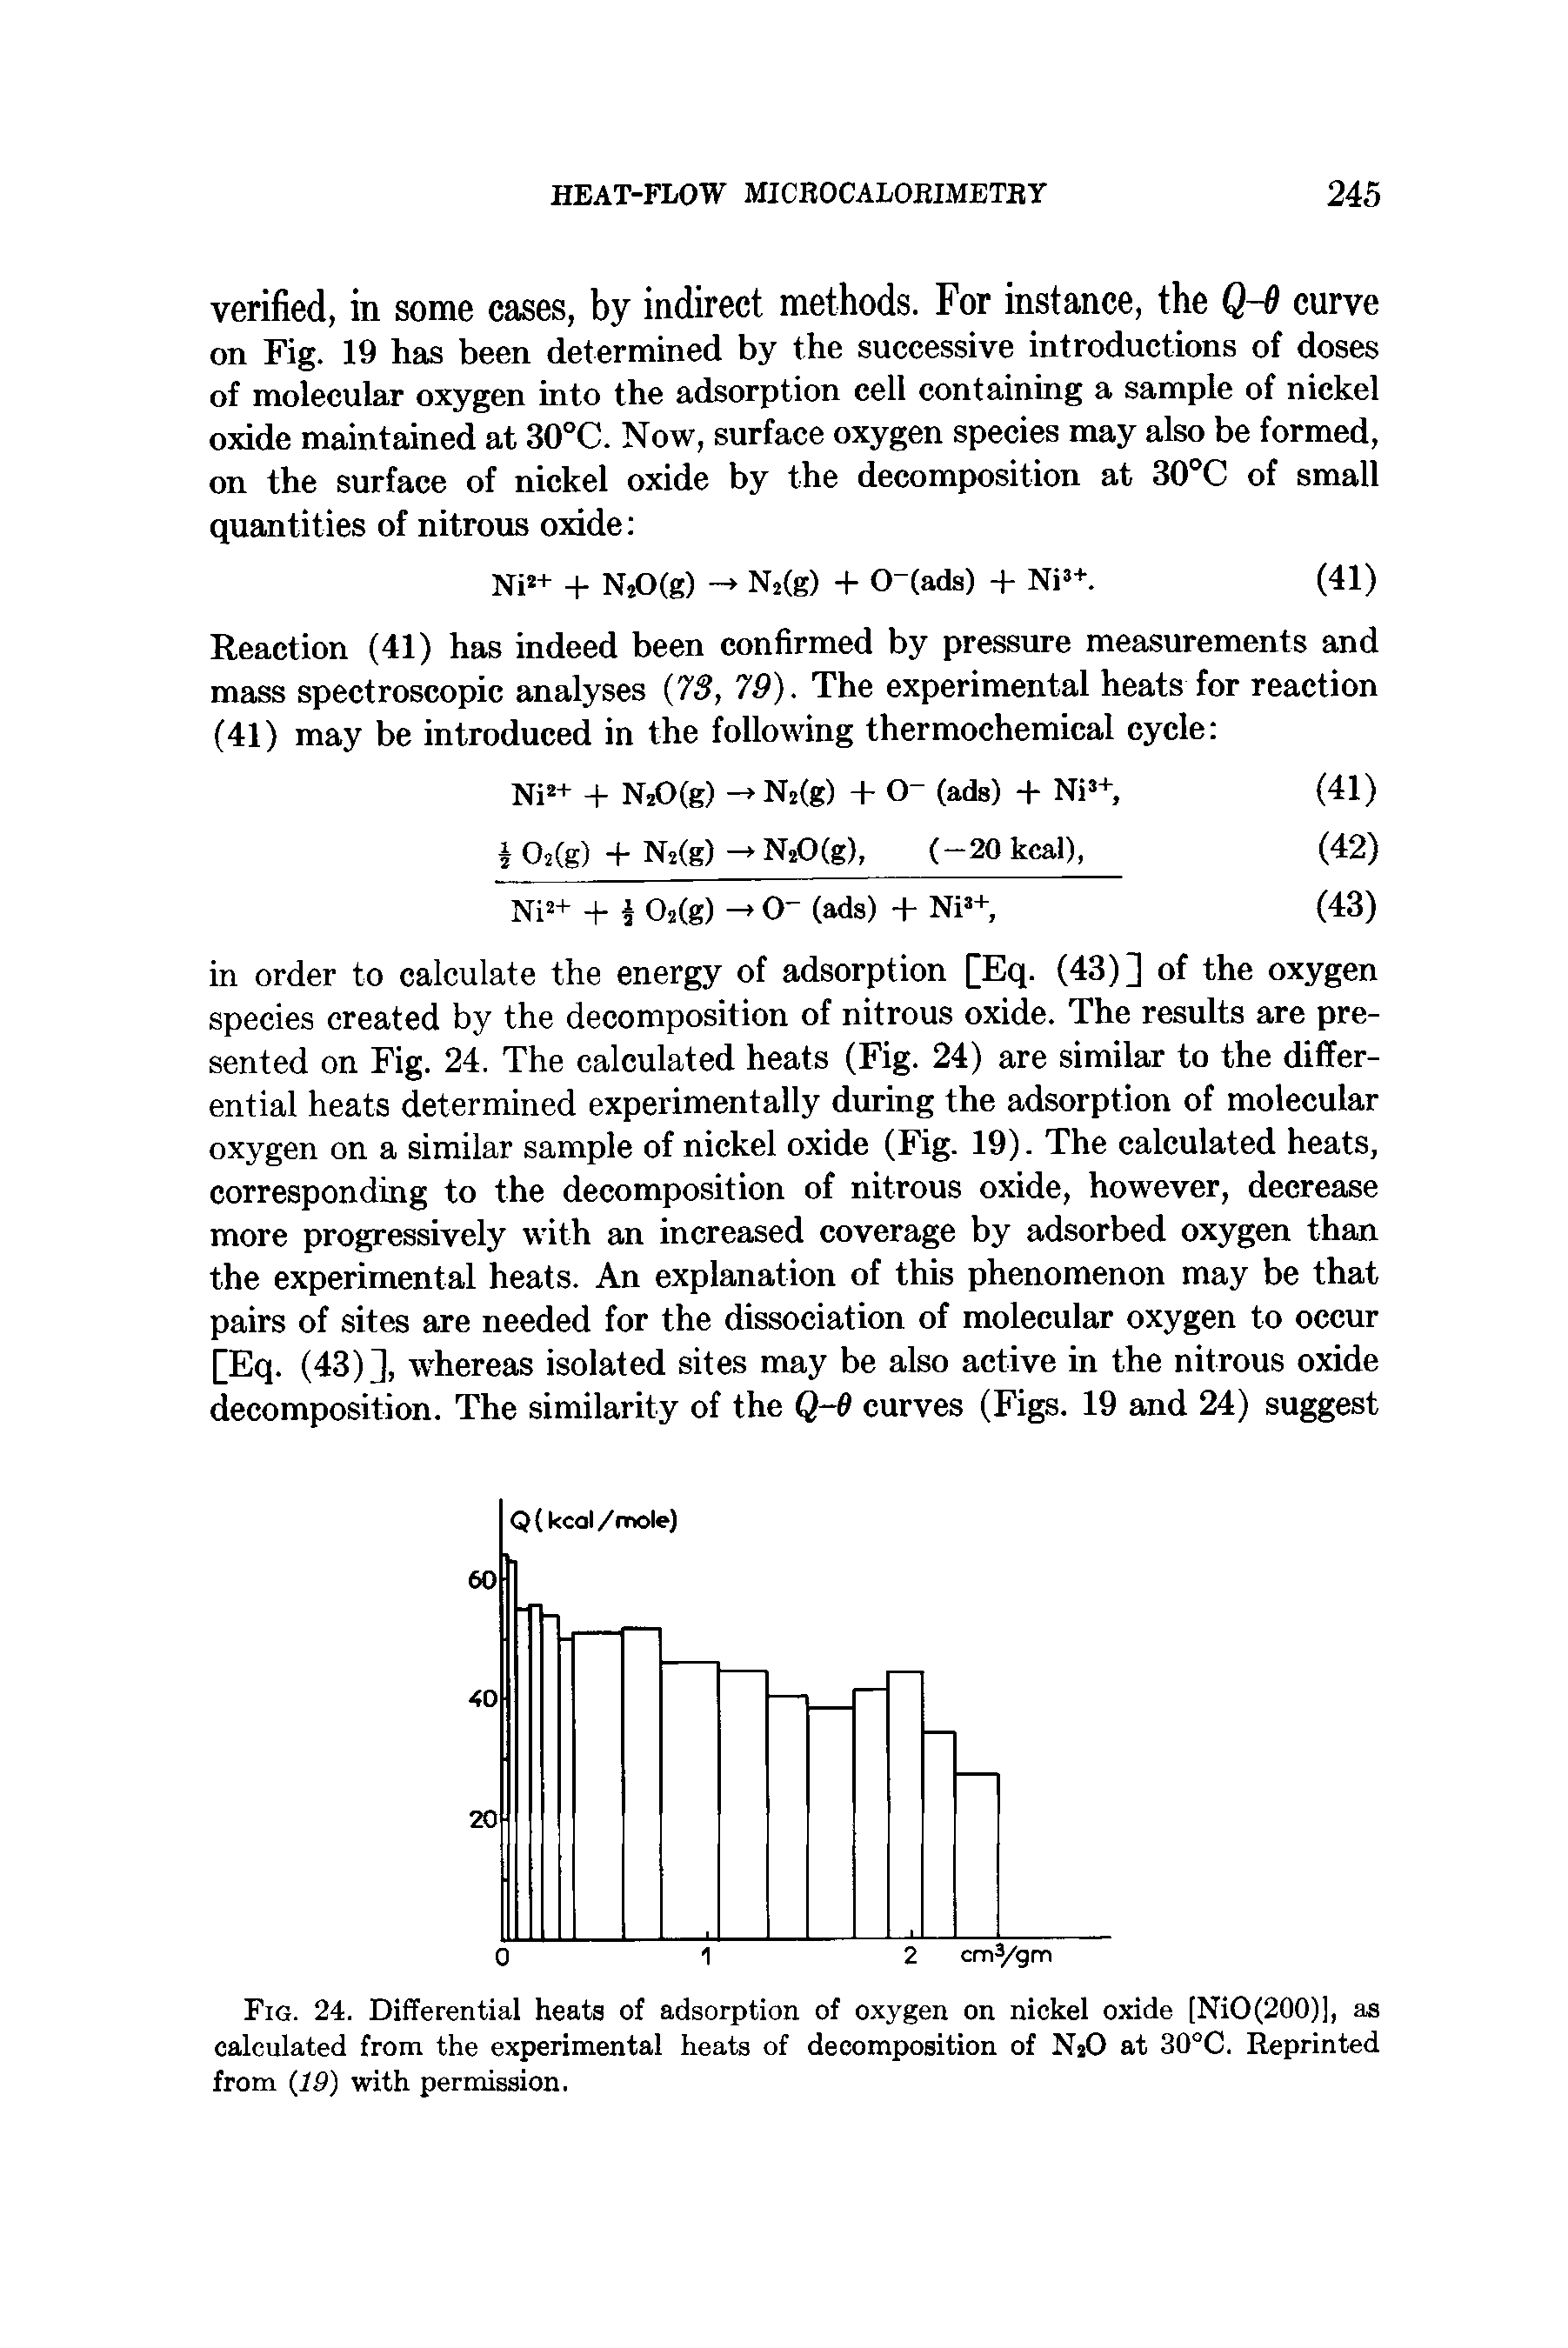 Fig. 24. Differential heats of adsorption of oxygen on nickel oxide [NiO(200)], as calculated from the experimental heats of decomposition of N20 at 30°C. Reprinted from (19) with permission.